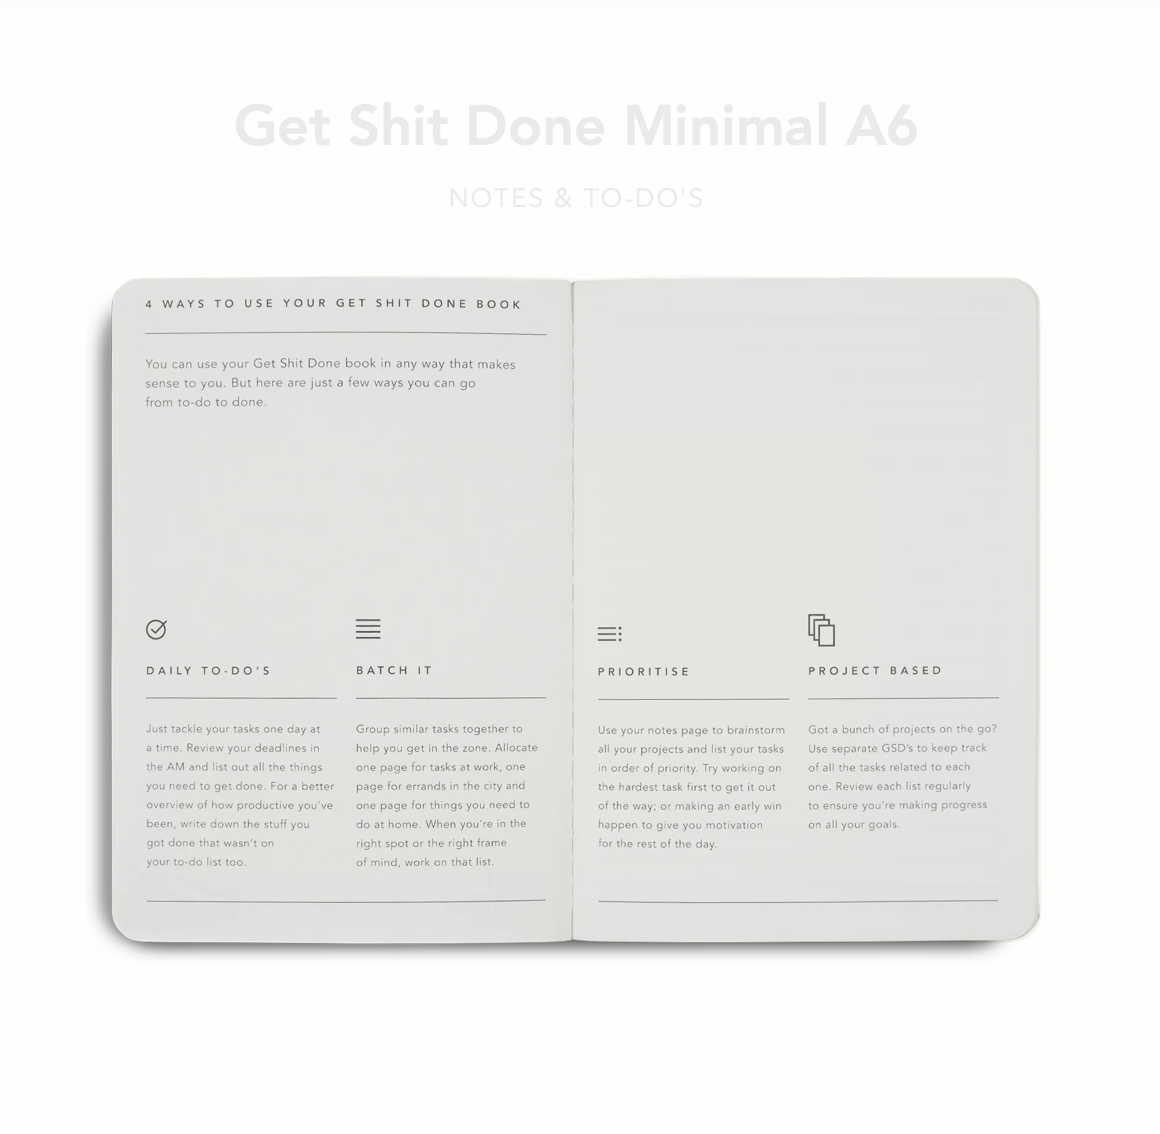 Get Shit Done Journal A6